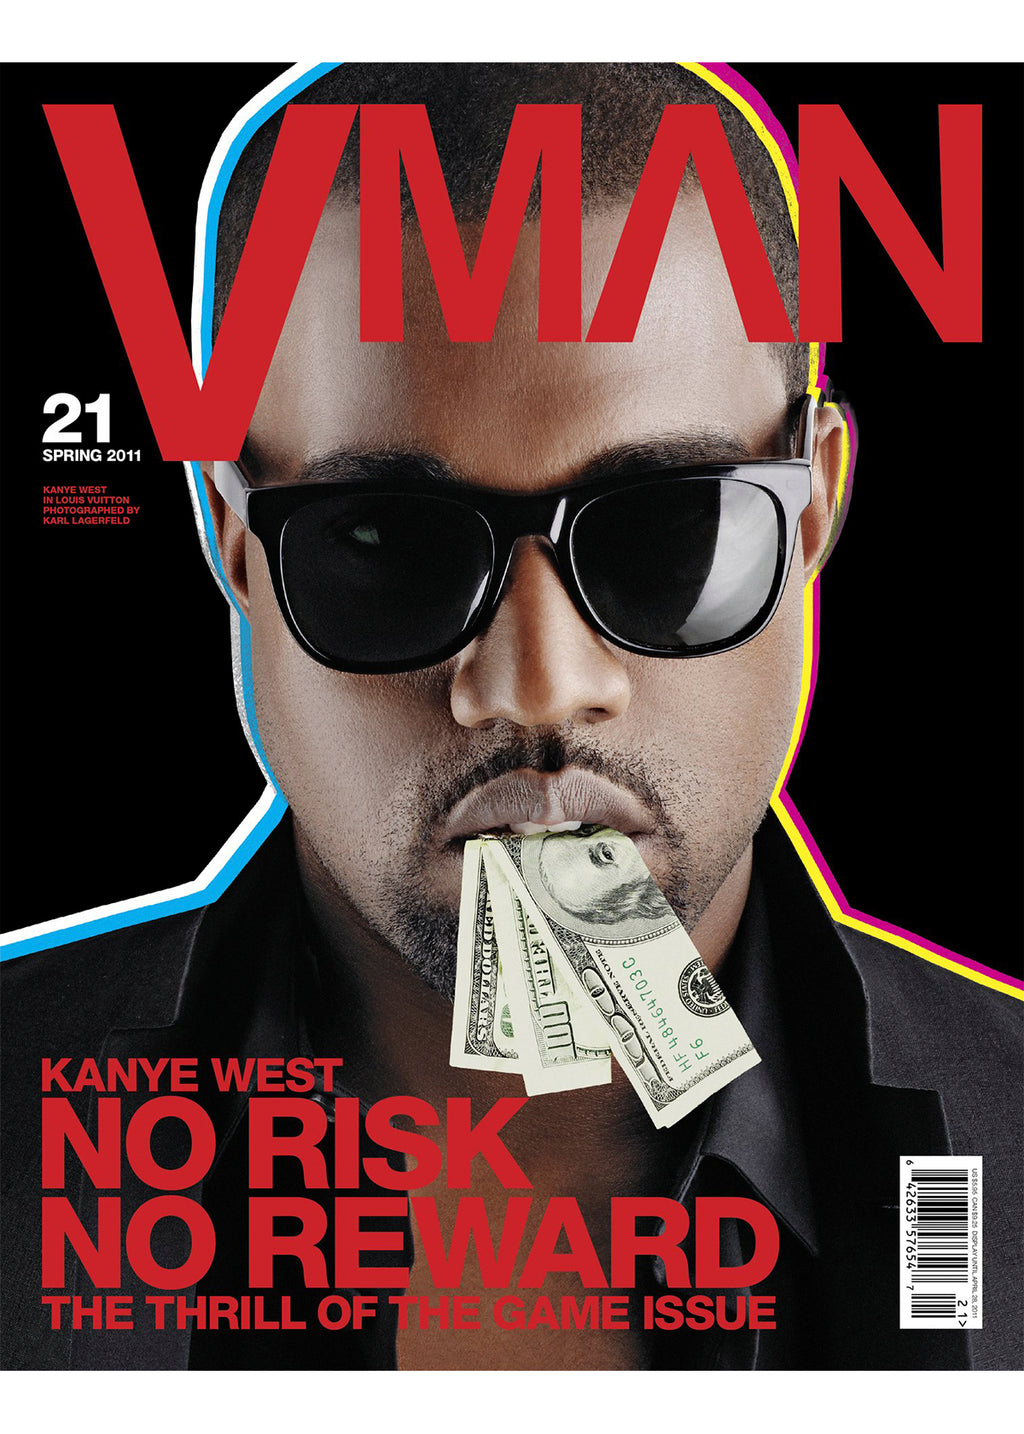 VMAN 21 THE THRILL OF THE GAME ISSUE